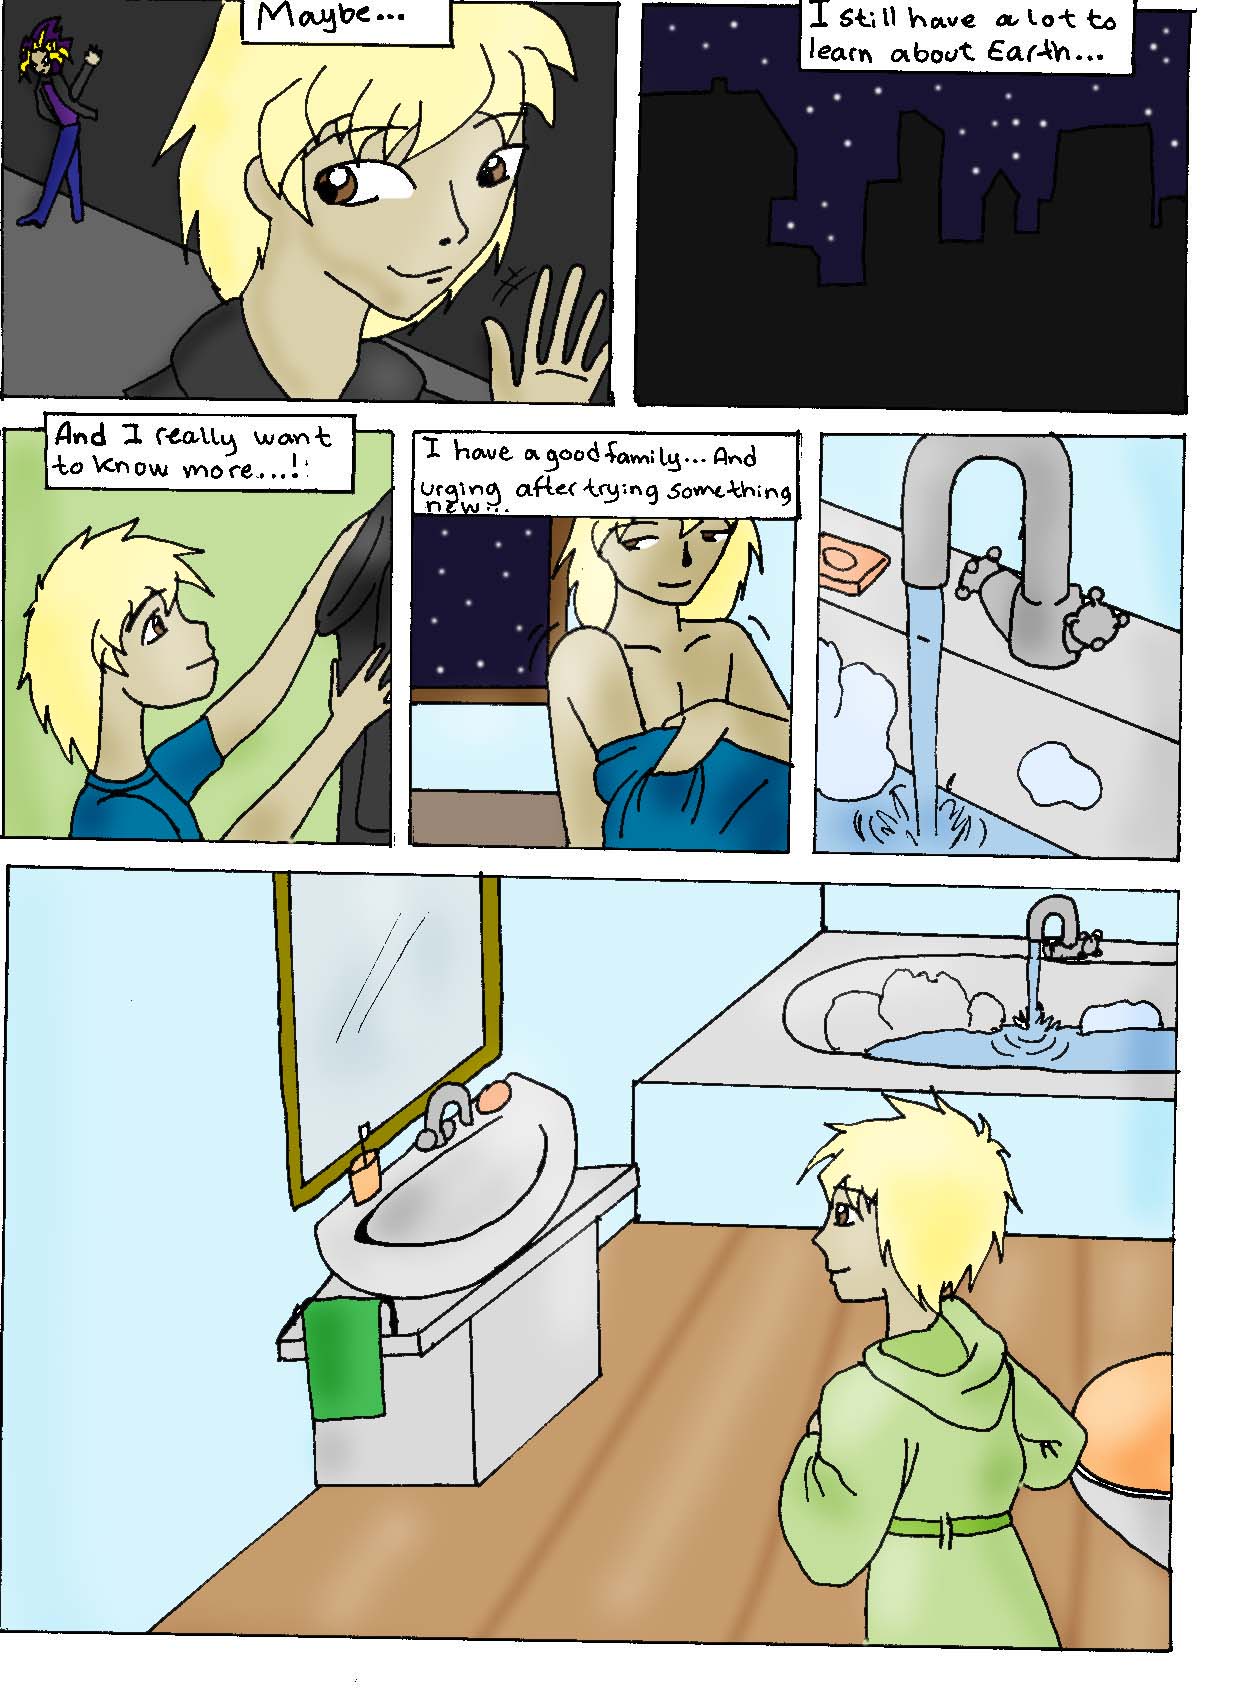 Who am I? Page 8 by Bakura_Angel_of_Light